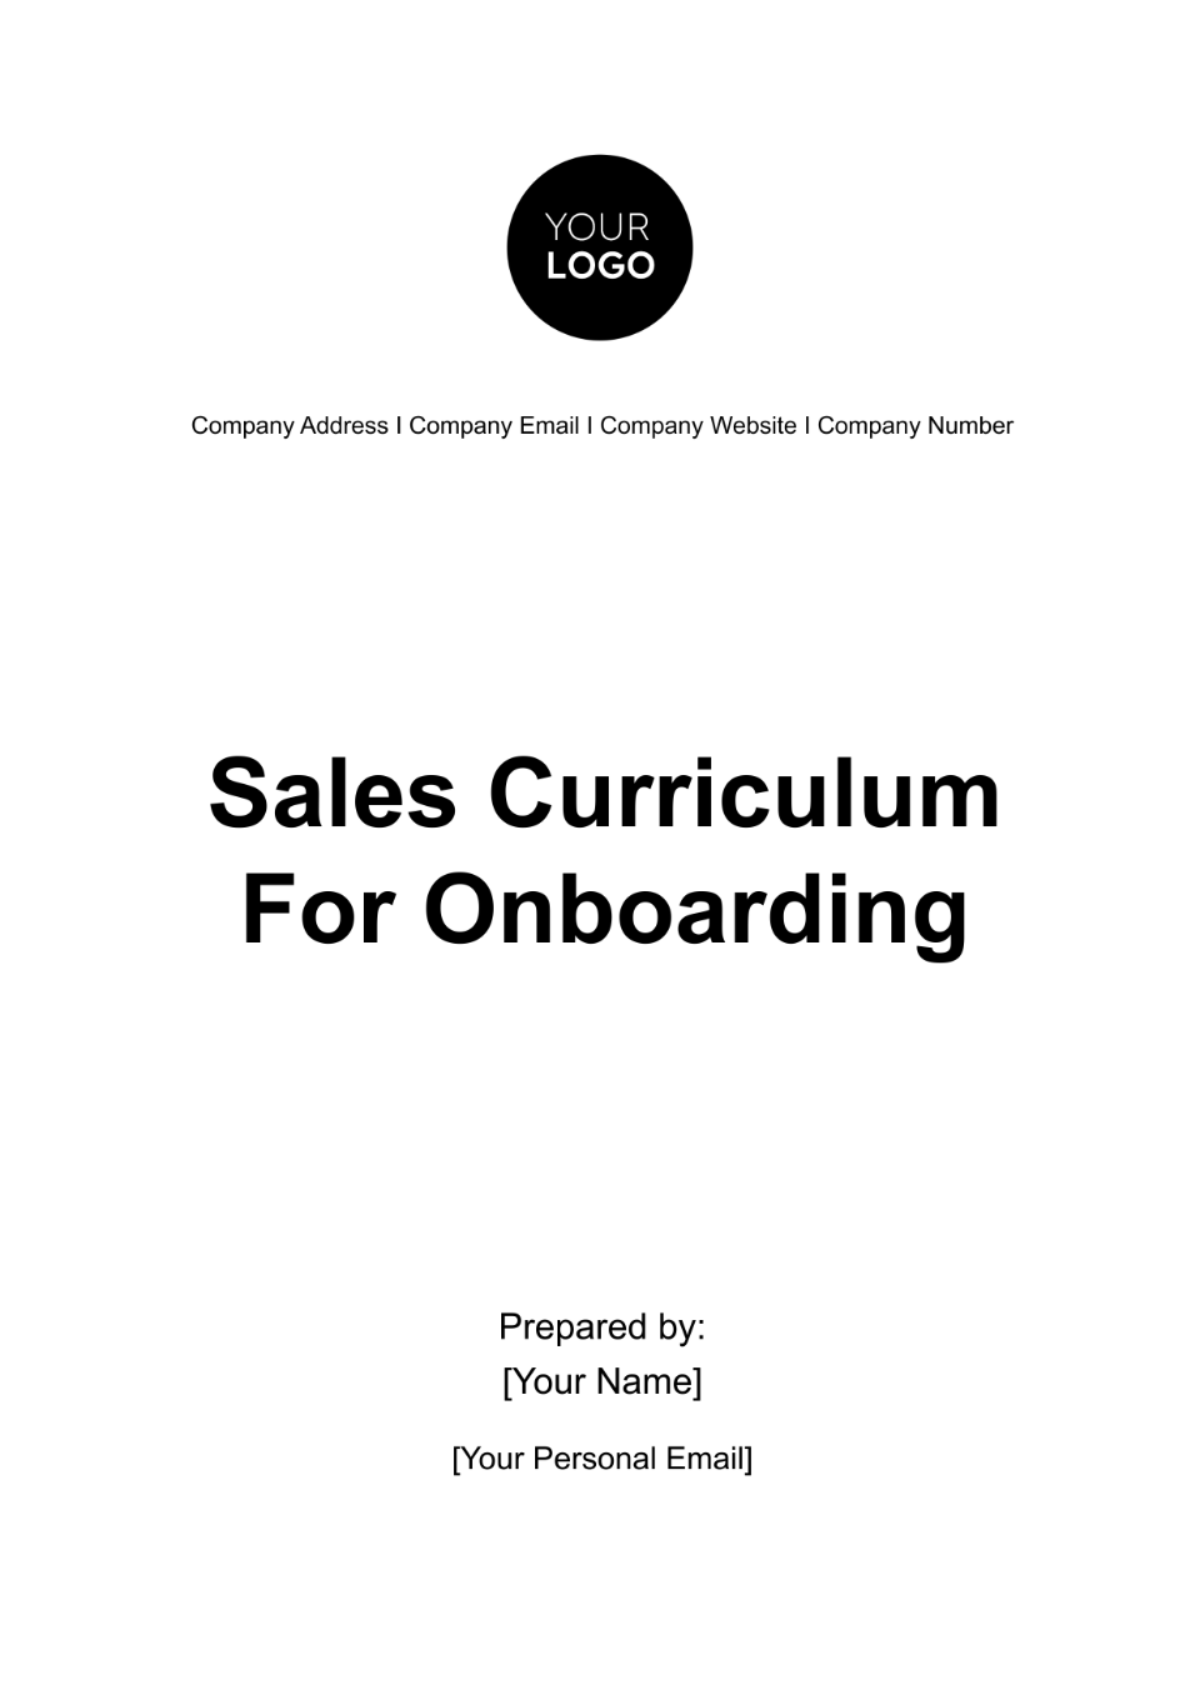 Free Sales Curriculum for Onboarding Template